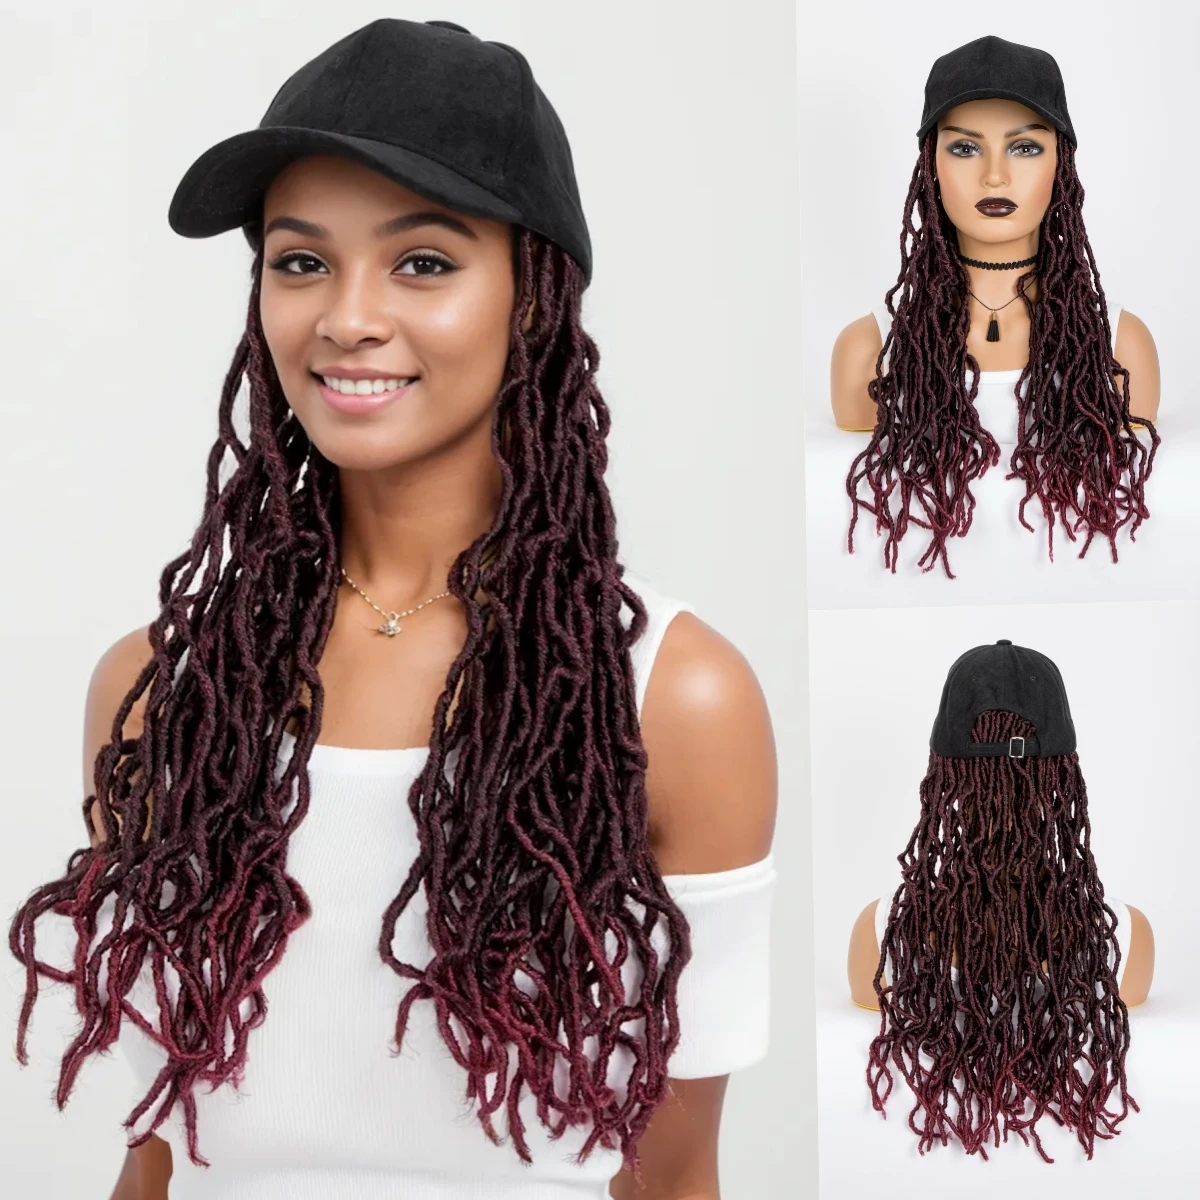 

WIGERA Synthetic Hot Sale Braided Baseball Cap TBUG Soft Nu Faux Locs Wigs With Hair Extensions Hat Wig For Afro Black Women Use